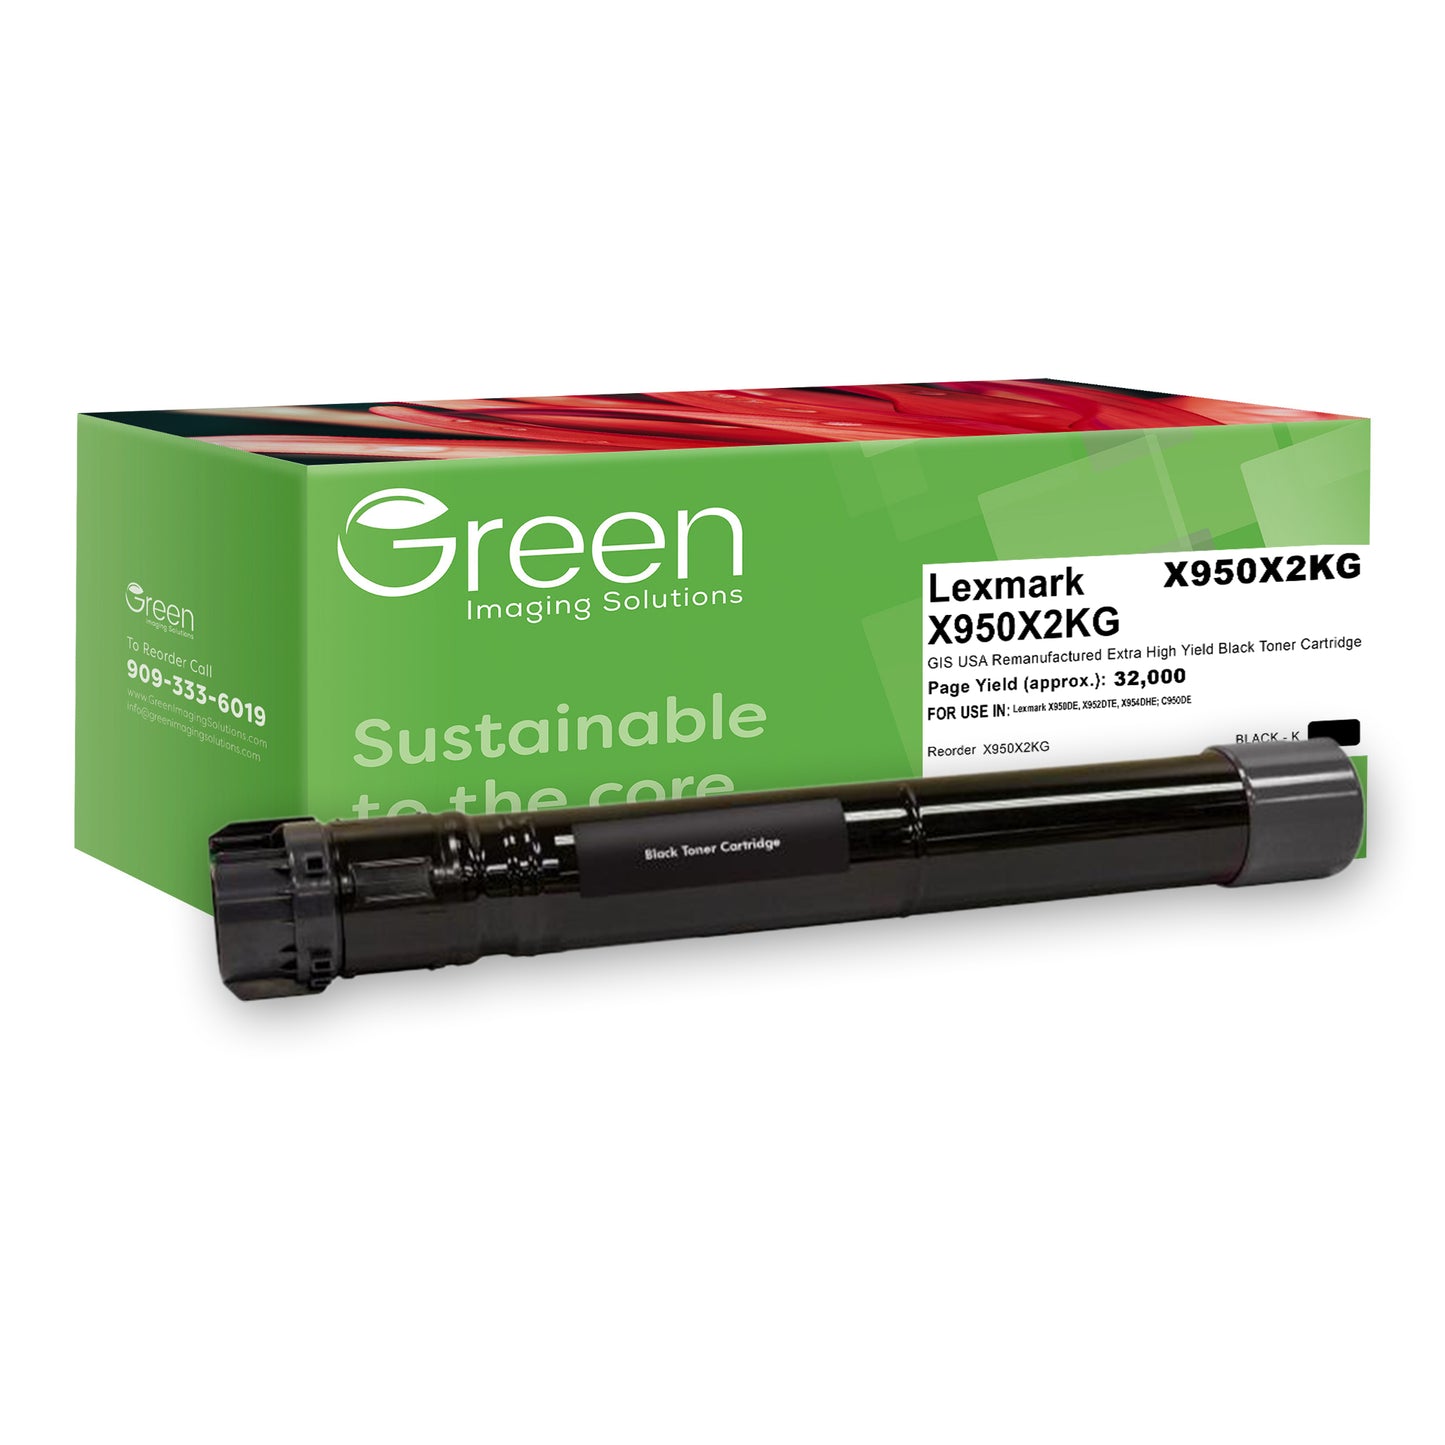 Green Imaging Solutions USA Remanufactured Extra High Yield Black Toner Cartridge for Lexmark X950